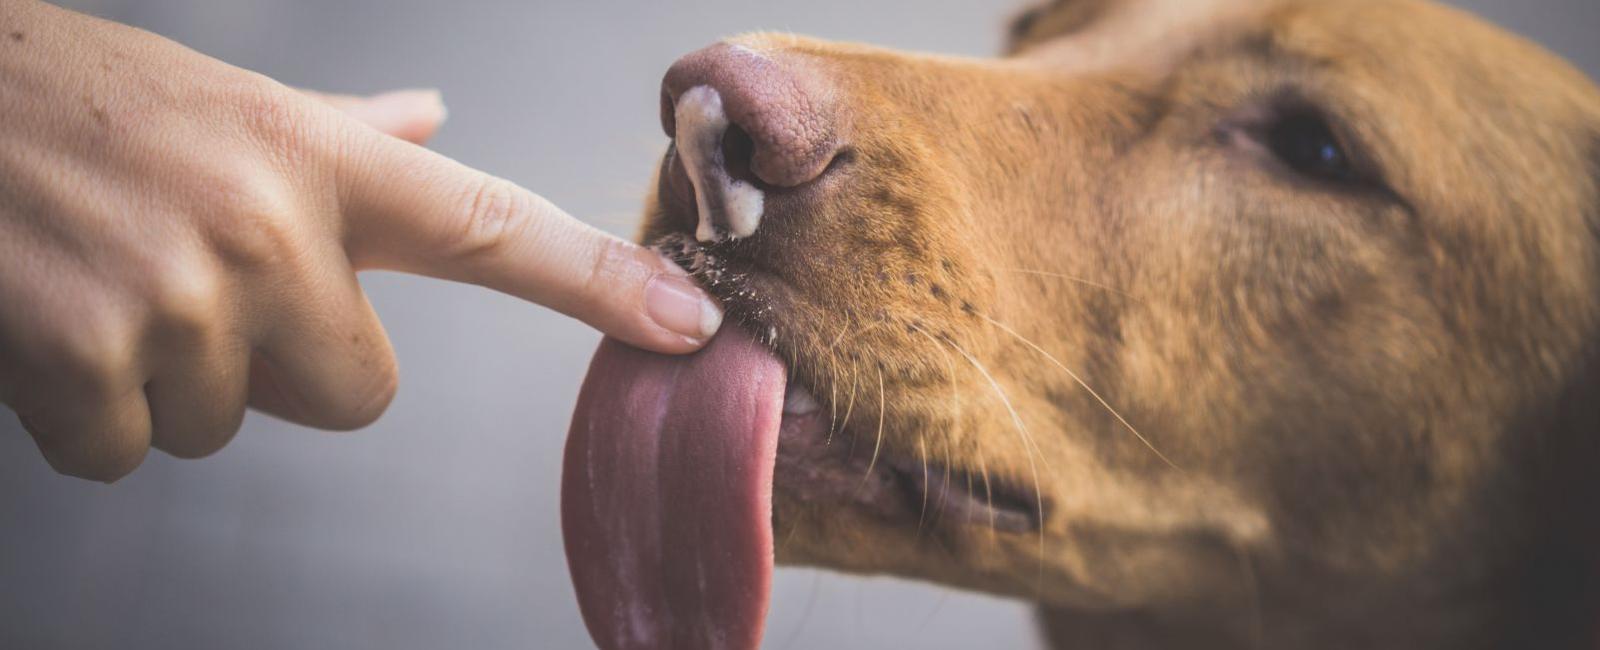 Why Does Your Dog Lick Your Underwear?